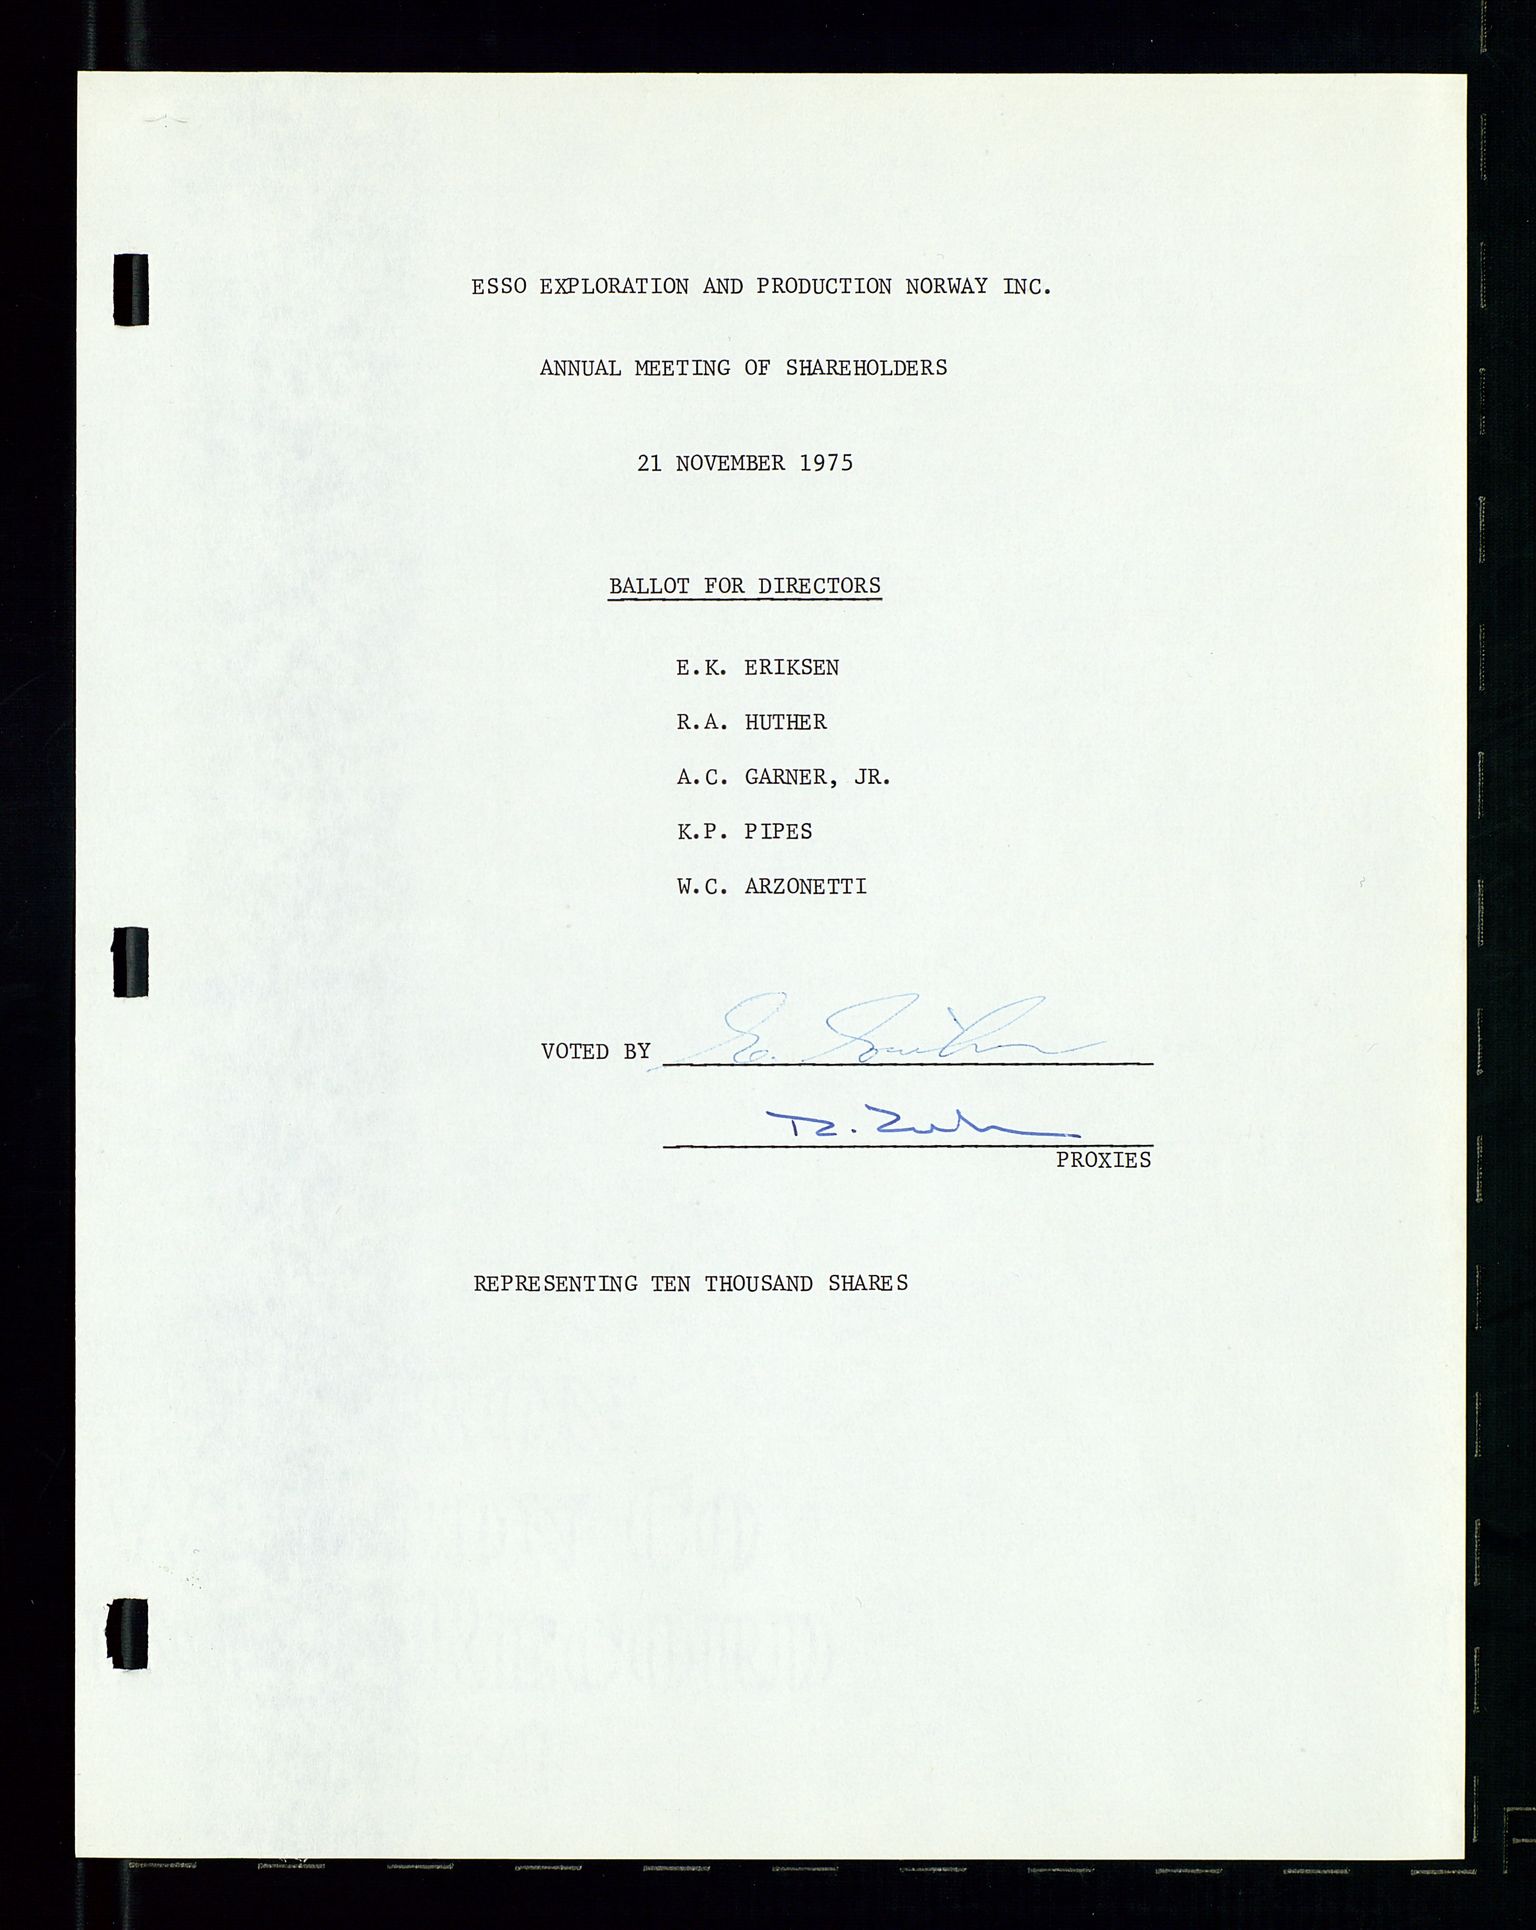 Pa 1512 - Esso Exploration and Production Norway Inc., SAST/A-101917/A/Aa/L0001/0002: Styredokumenter / Corporate records, Board meeting minutes, Agreements, Stocholder meetings, 1975-1979, s. 17